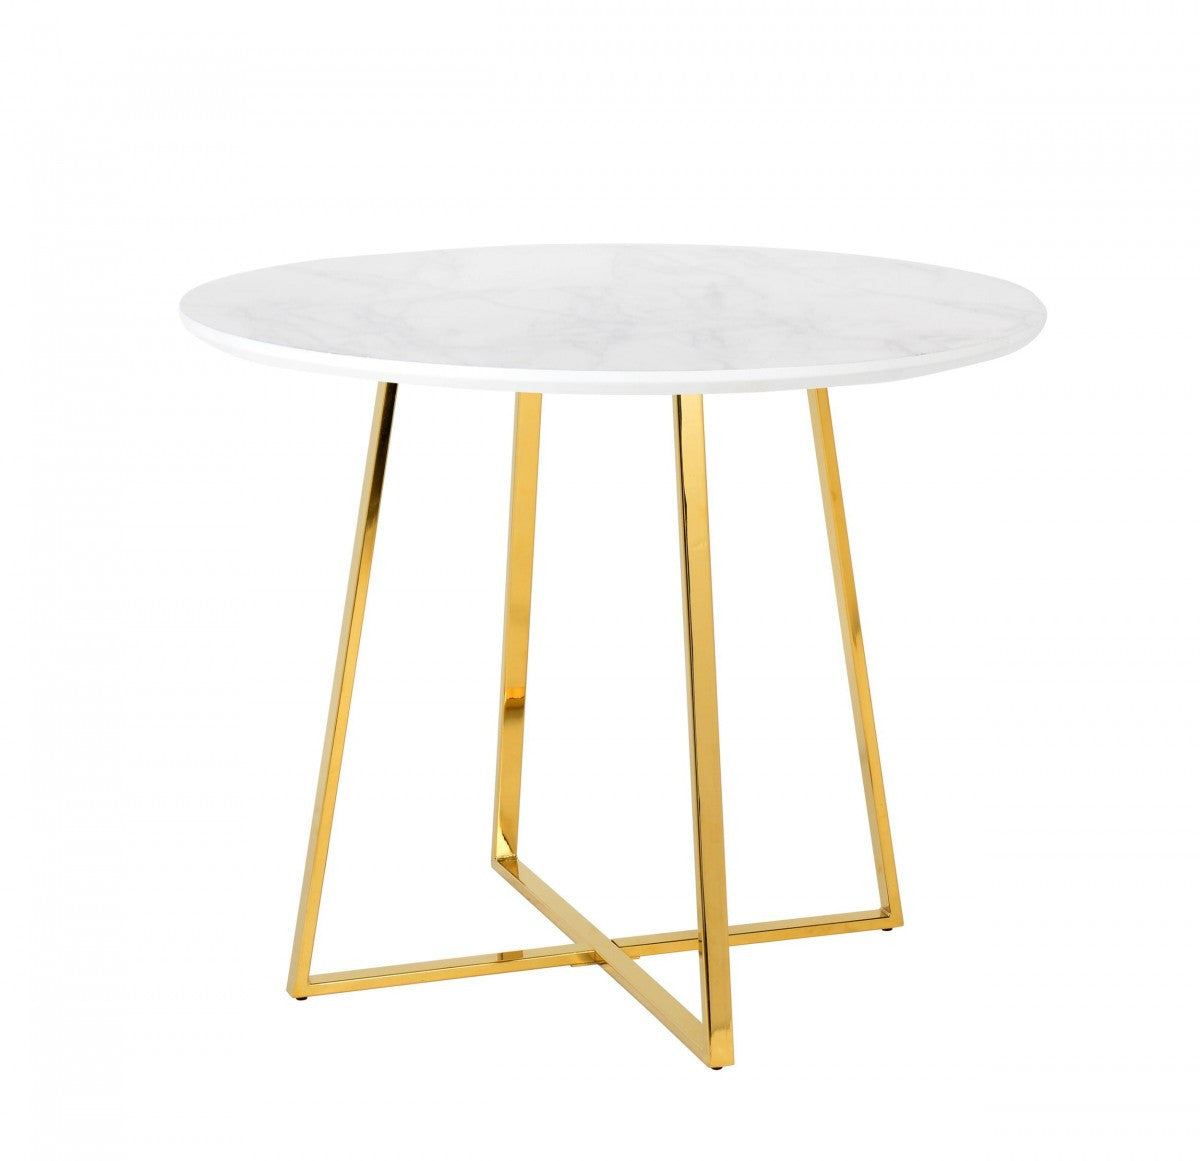 39" White Faux Marble and Gold Round Dining Table